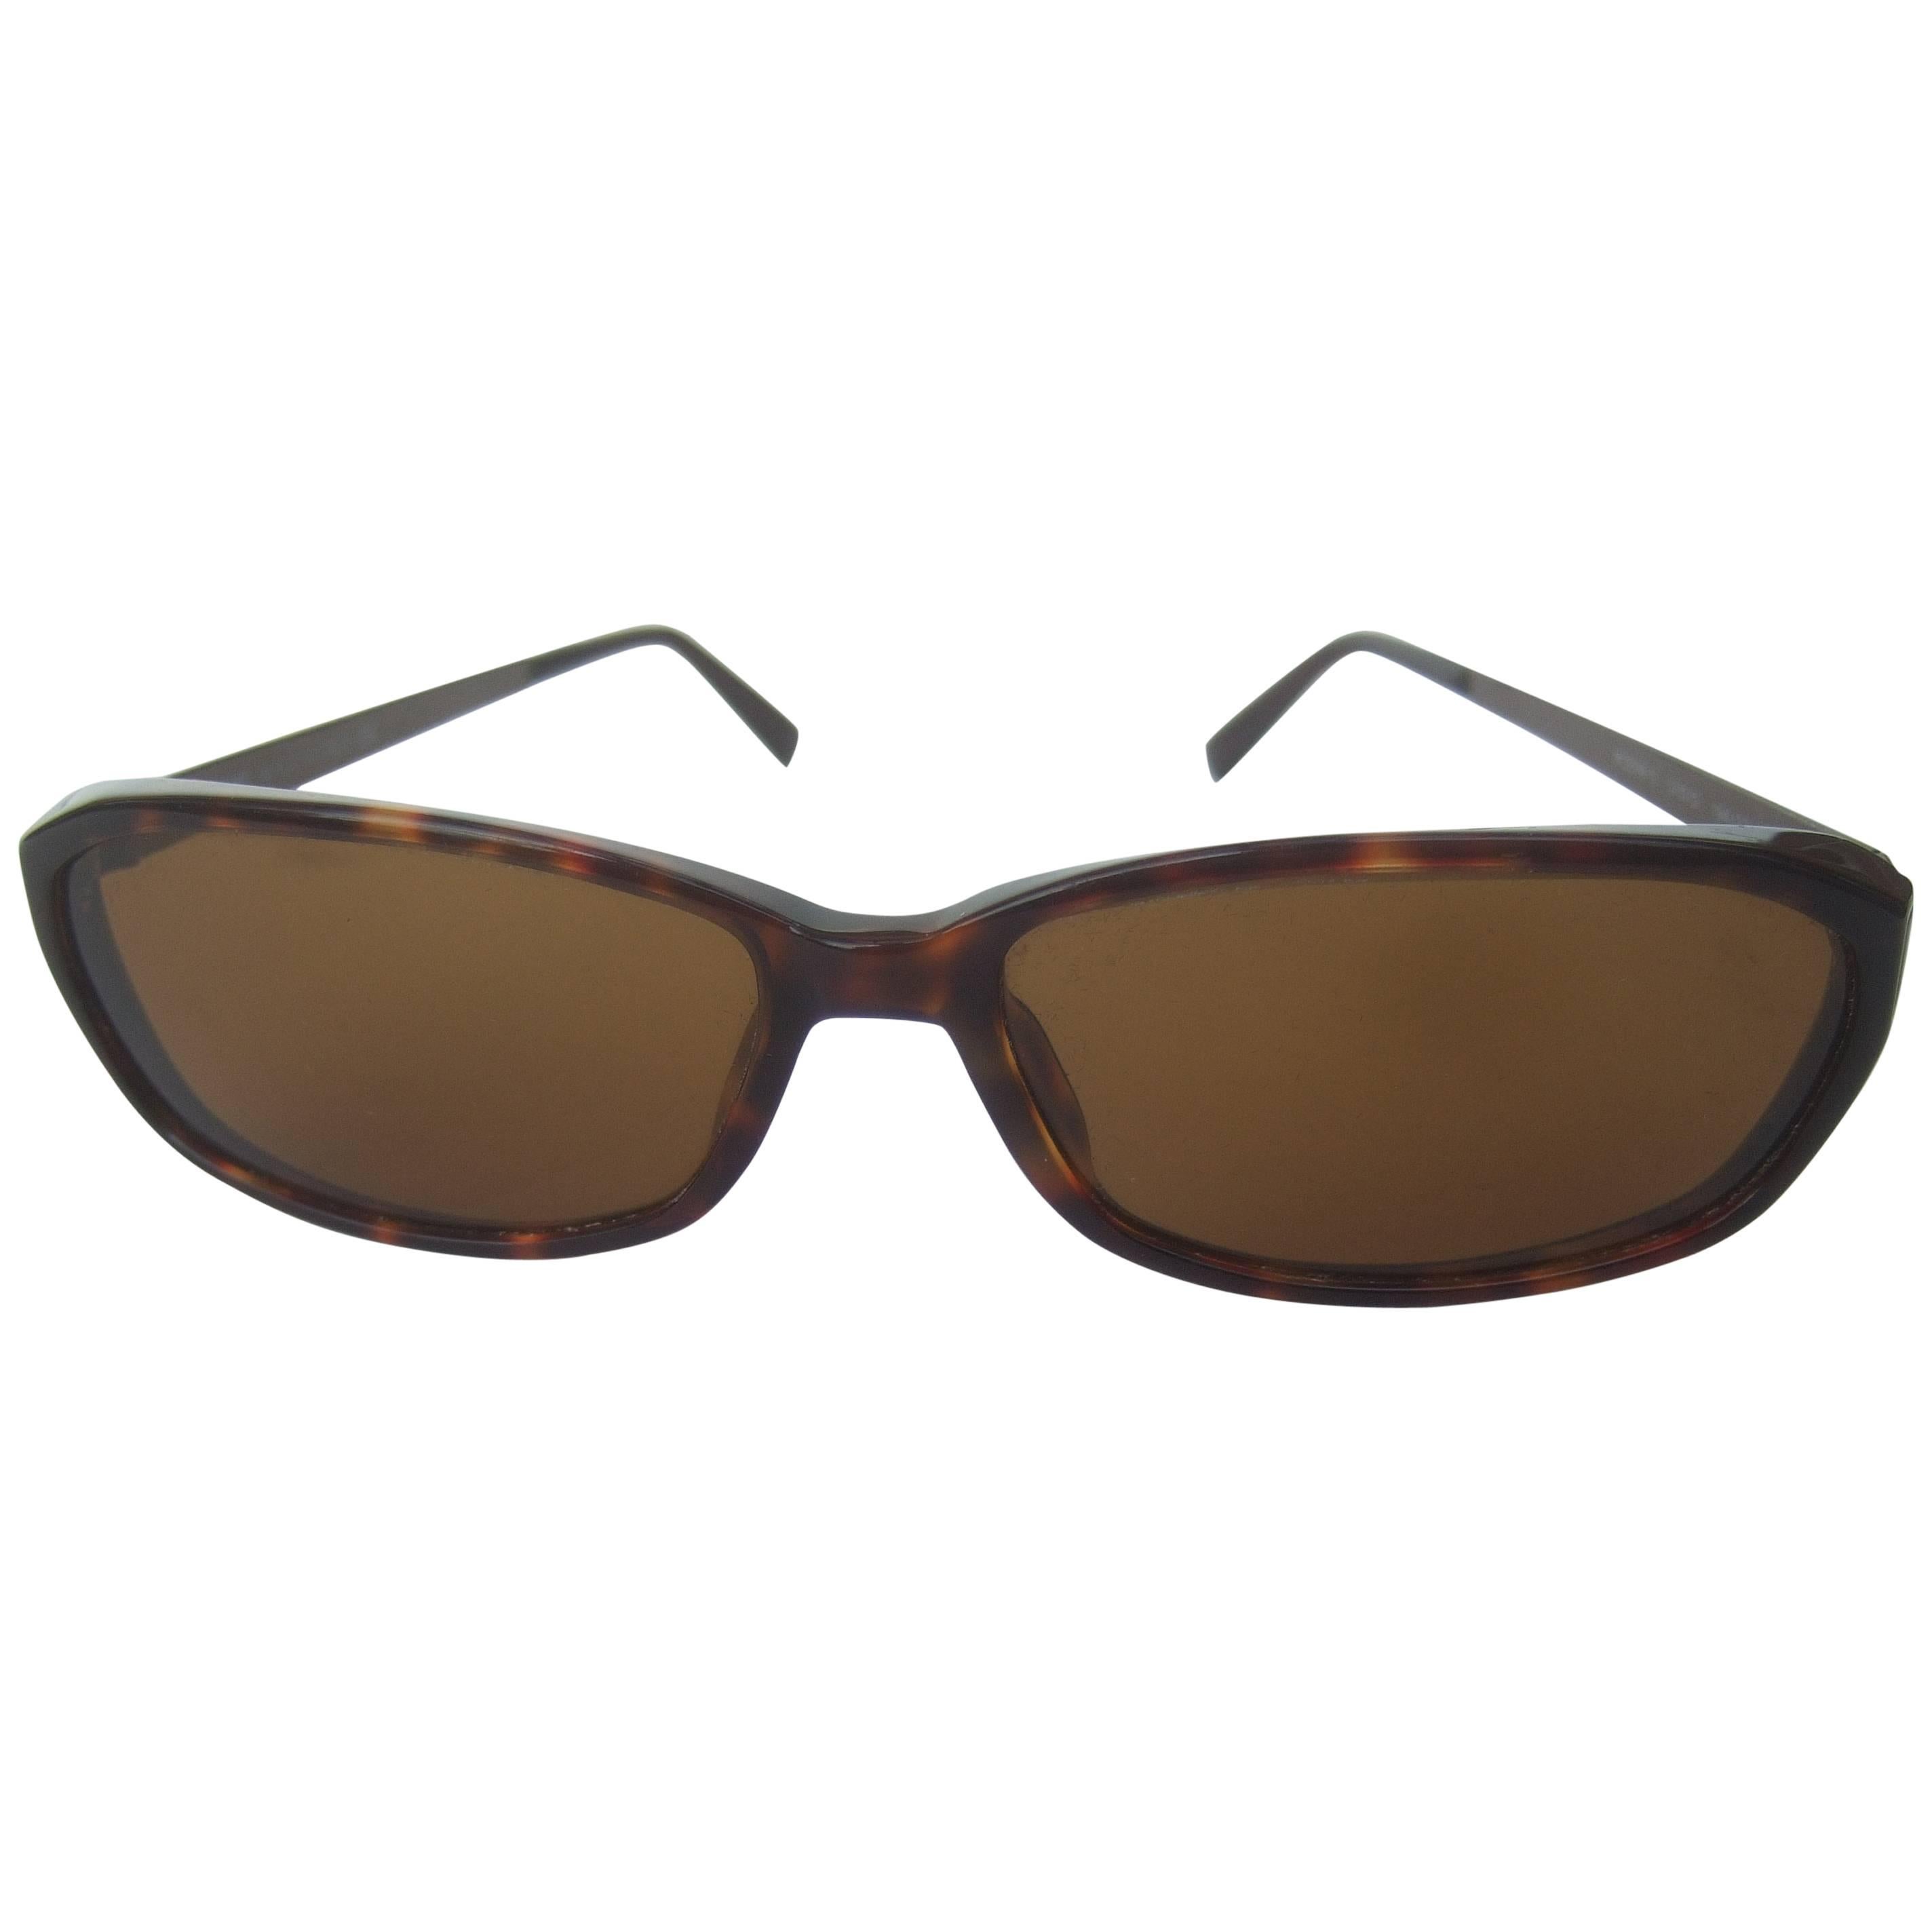 Moschino Tortoise Shell Brown Lucite Lens Sunglasses in Case For Sale